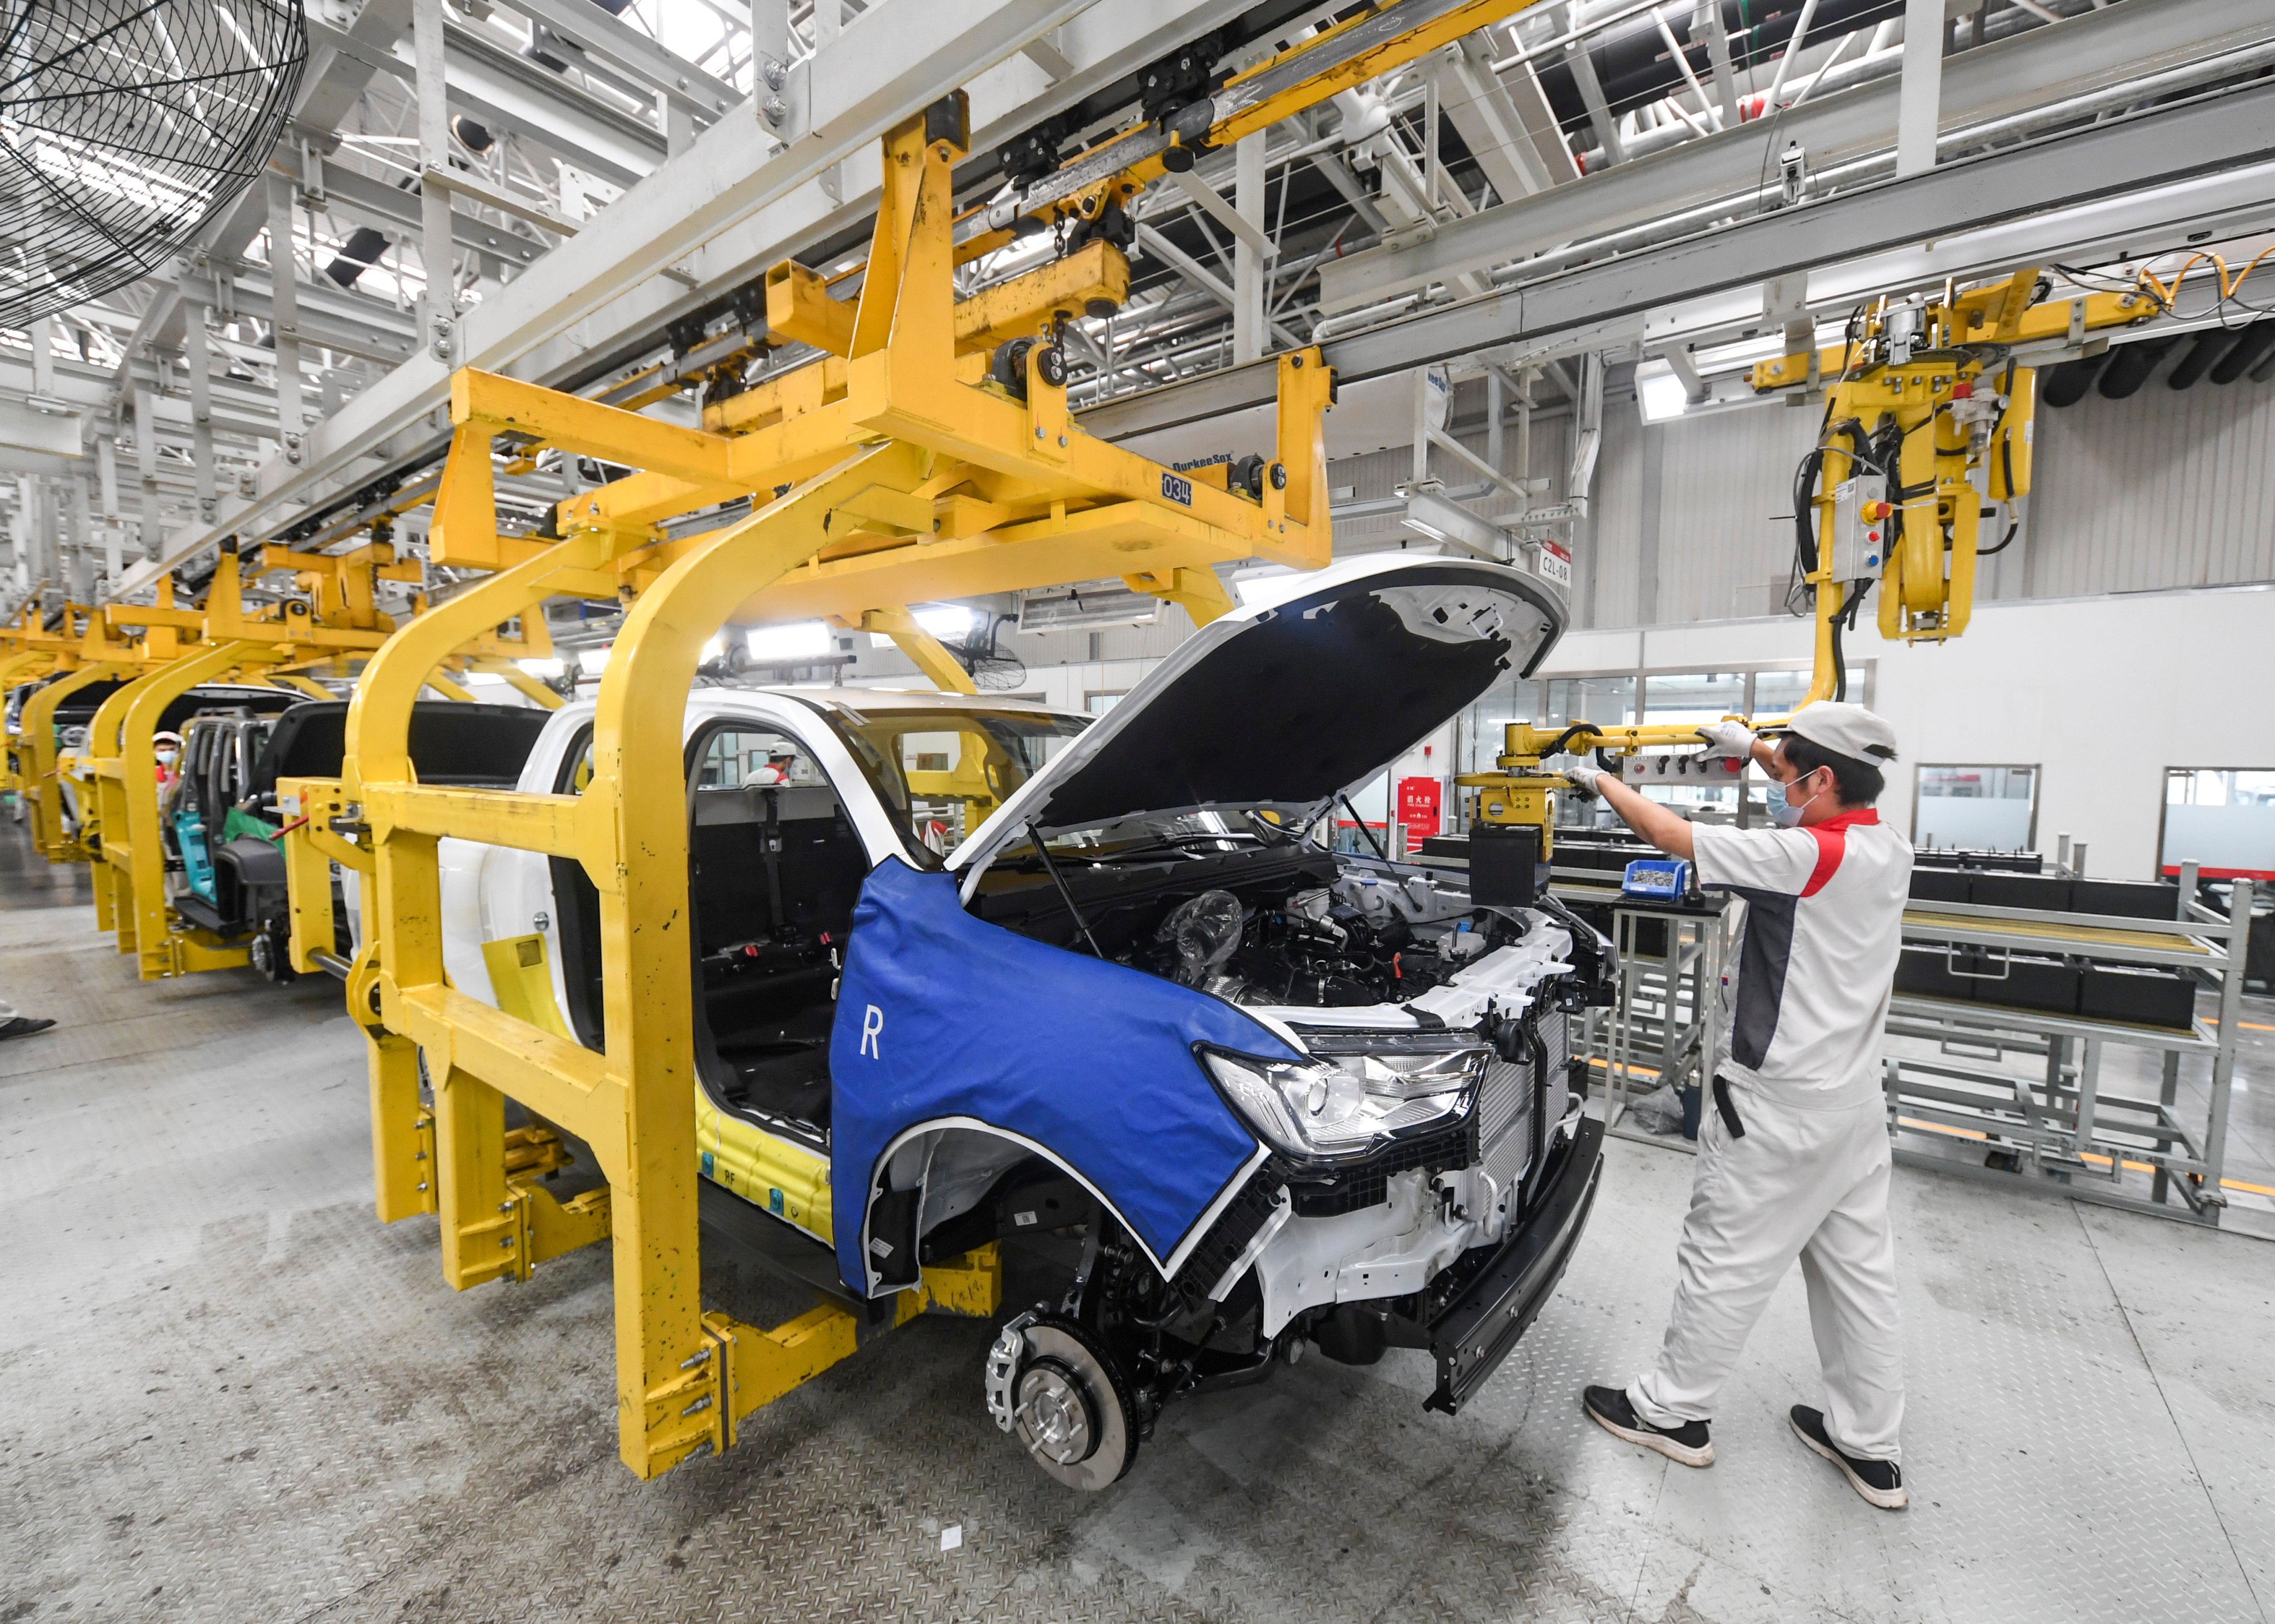 An employee works on the assembly line of Great Wall Motors in Chongqing on September 22. China’s expected recovery should be a blessing for global recovery and world trade growth in 2023 as economic activity speeds up again. Photo: Xinhua